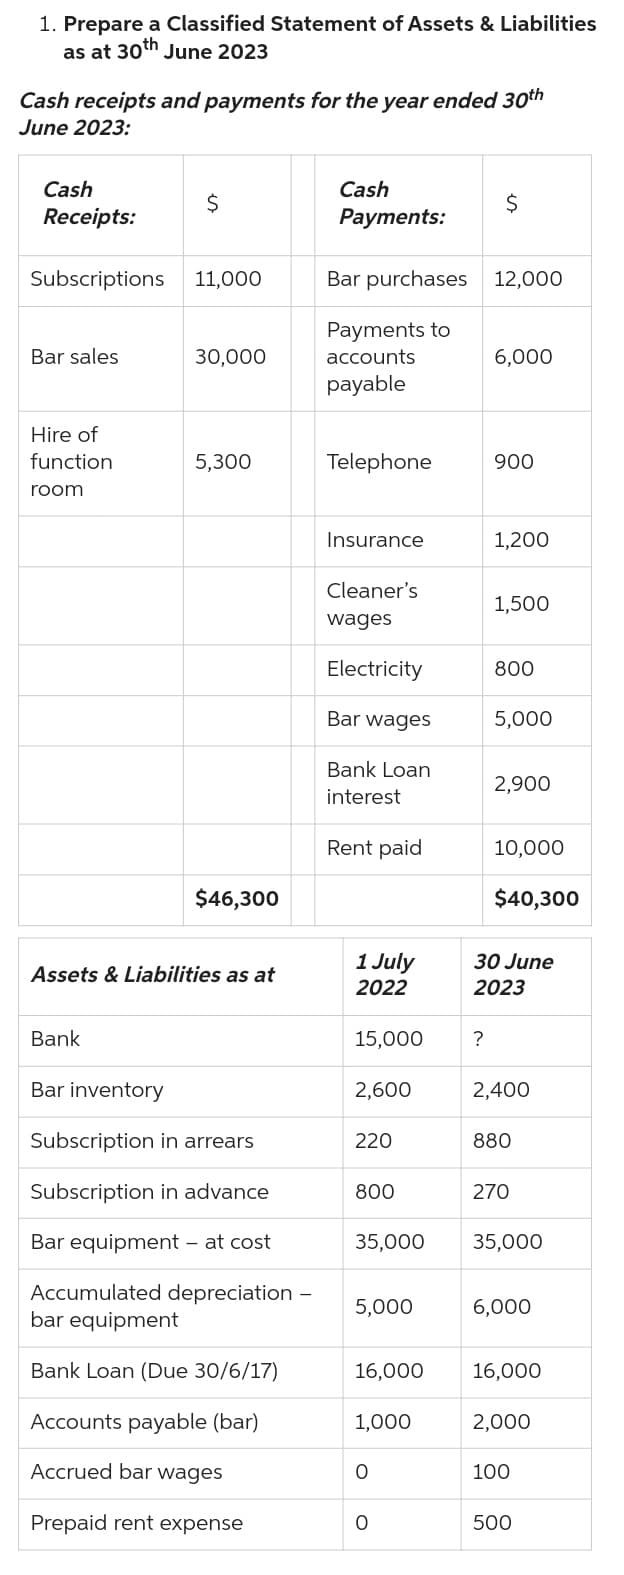 1. Prepare a Classified Statement of Assets & Liabilities
as at 30th June 2023
Cash receipts and payments for the year ended 30th
June 2023:
Cash
Receipts:
Subscriptions 11,000
Bar sales
Hire of
function
room
$
Bank
Bar inventory
30,000
5,300
Assets & Liabilities as at
$46,300
Subscription in arrears
Subscription in advance
Bar equipment - at cost
Accumulated depreciation
bar equipment
Bank Loan (Due 30/6/17)
Accounts payable (bar)
Accrued bar wages
Prepaid rent expense
Cash
Payments:
Bar purchases 12,000
Payments to
accounts
payable
Telephone
Insurance
Cleaner's
wages
Electricity
Bar wages
Bank Loan
interest
Rent paid
1 July
2022
15,000
2,600
220
800
35,000
5,000
16,000
1,000
O
0
$
?
6,000
900
1,200
1,500
800
5,000
2,900
10,000
$40,300
30 June
2023
2,400
880
270
35,000
6,000
16,000
2,000
100
500